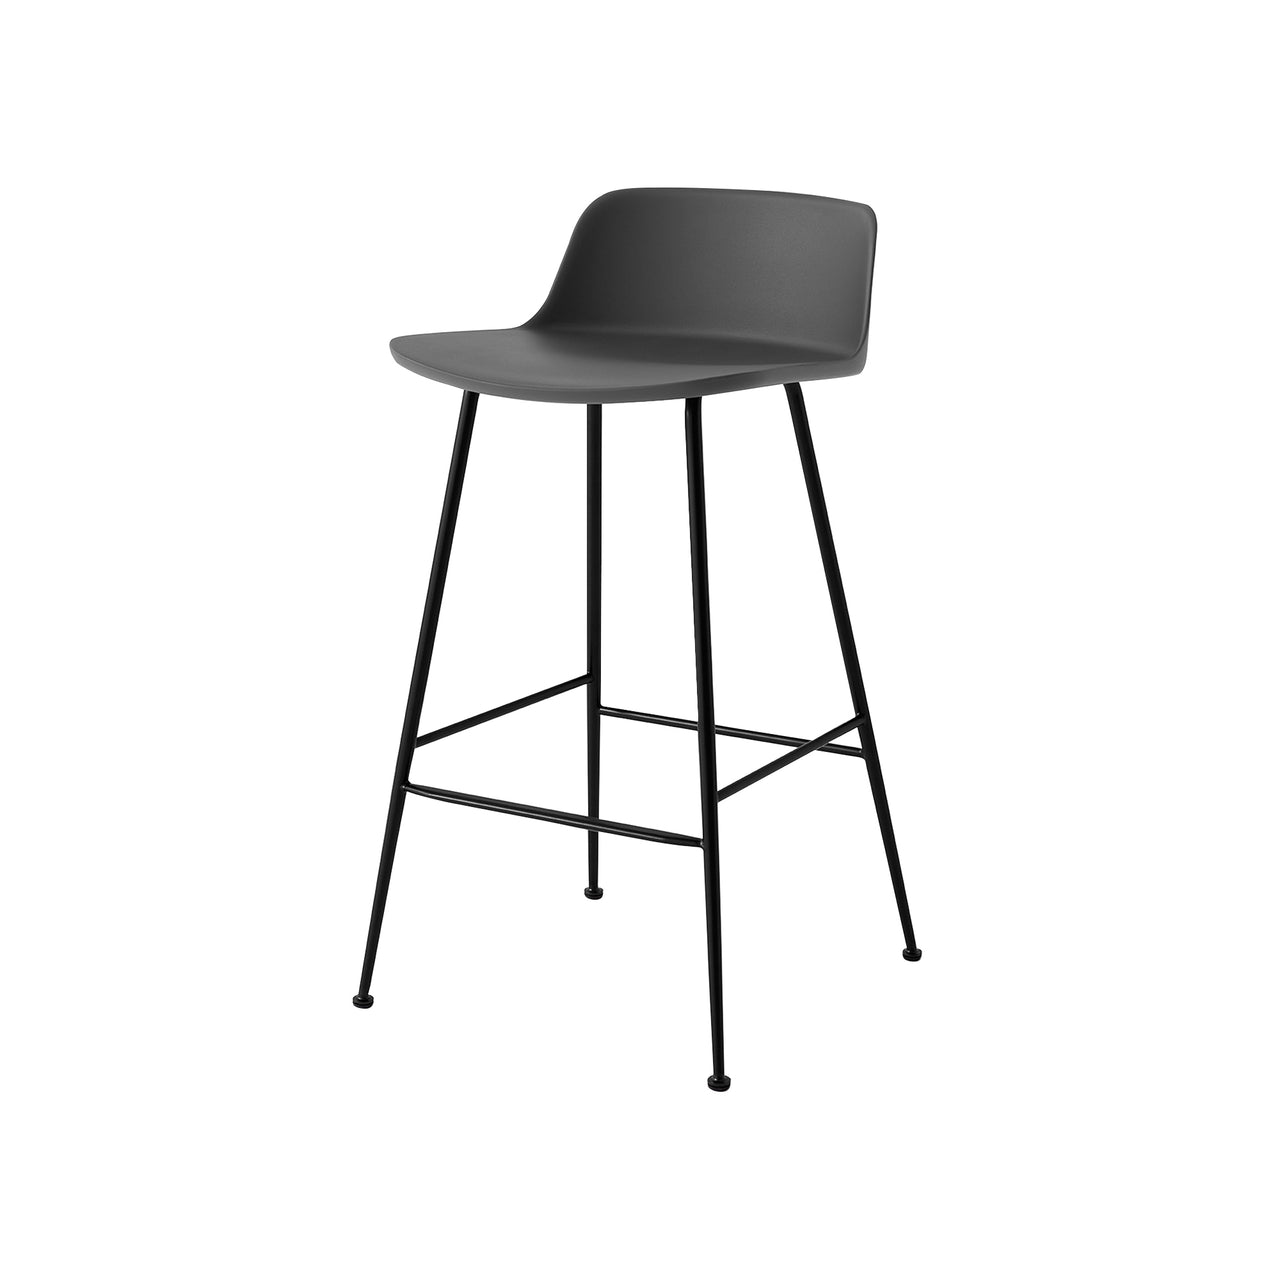 Rely Bar + Counter Lowback Stool: HW81 + HW86 + Counter (HW81) + Stone Grey + Black